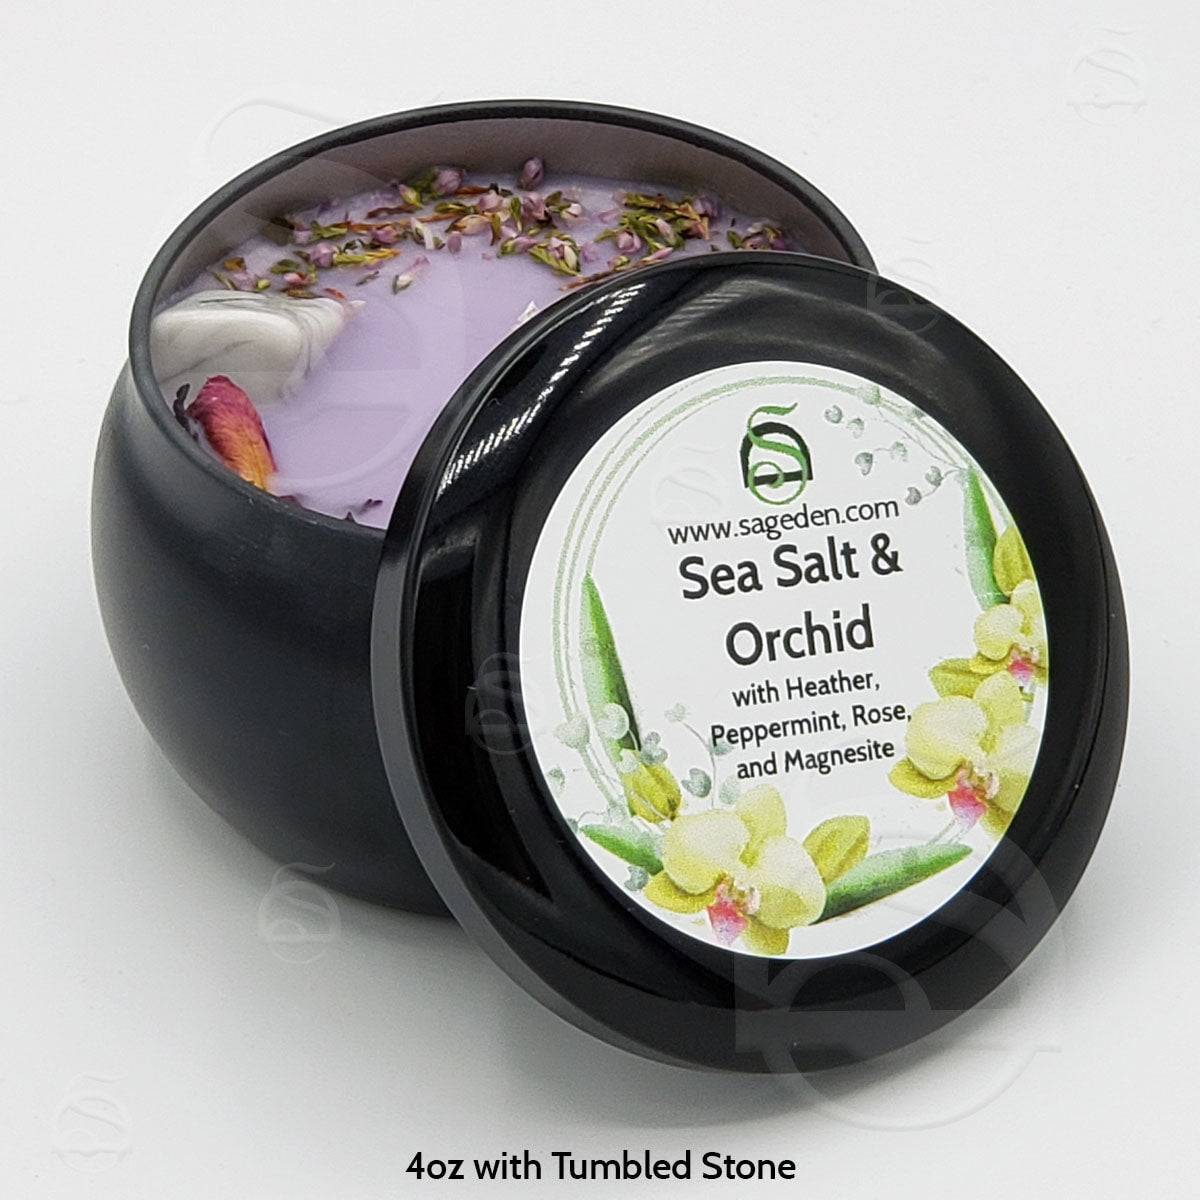 Sea Salt and Orchid Candle & Wax Melt (Sage Den Product)